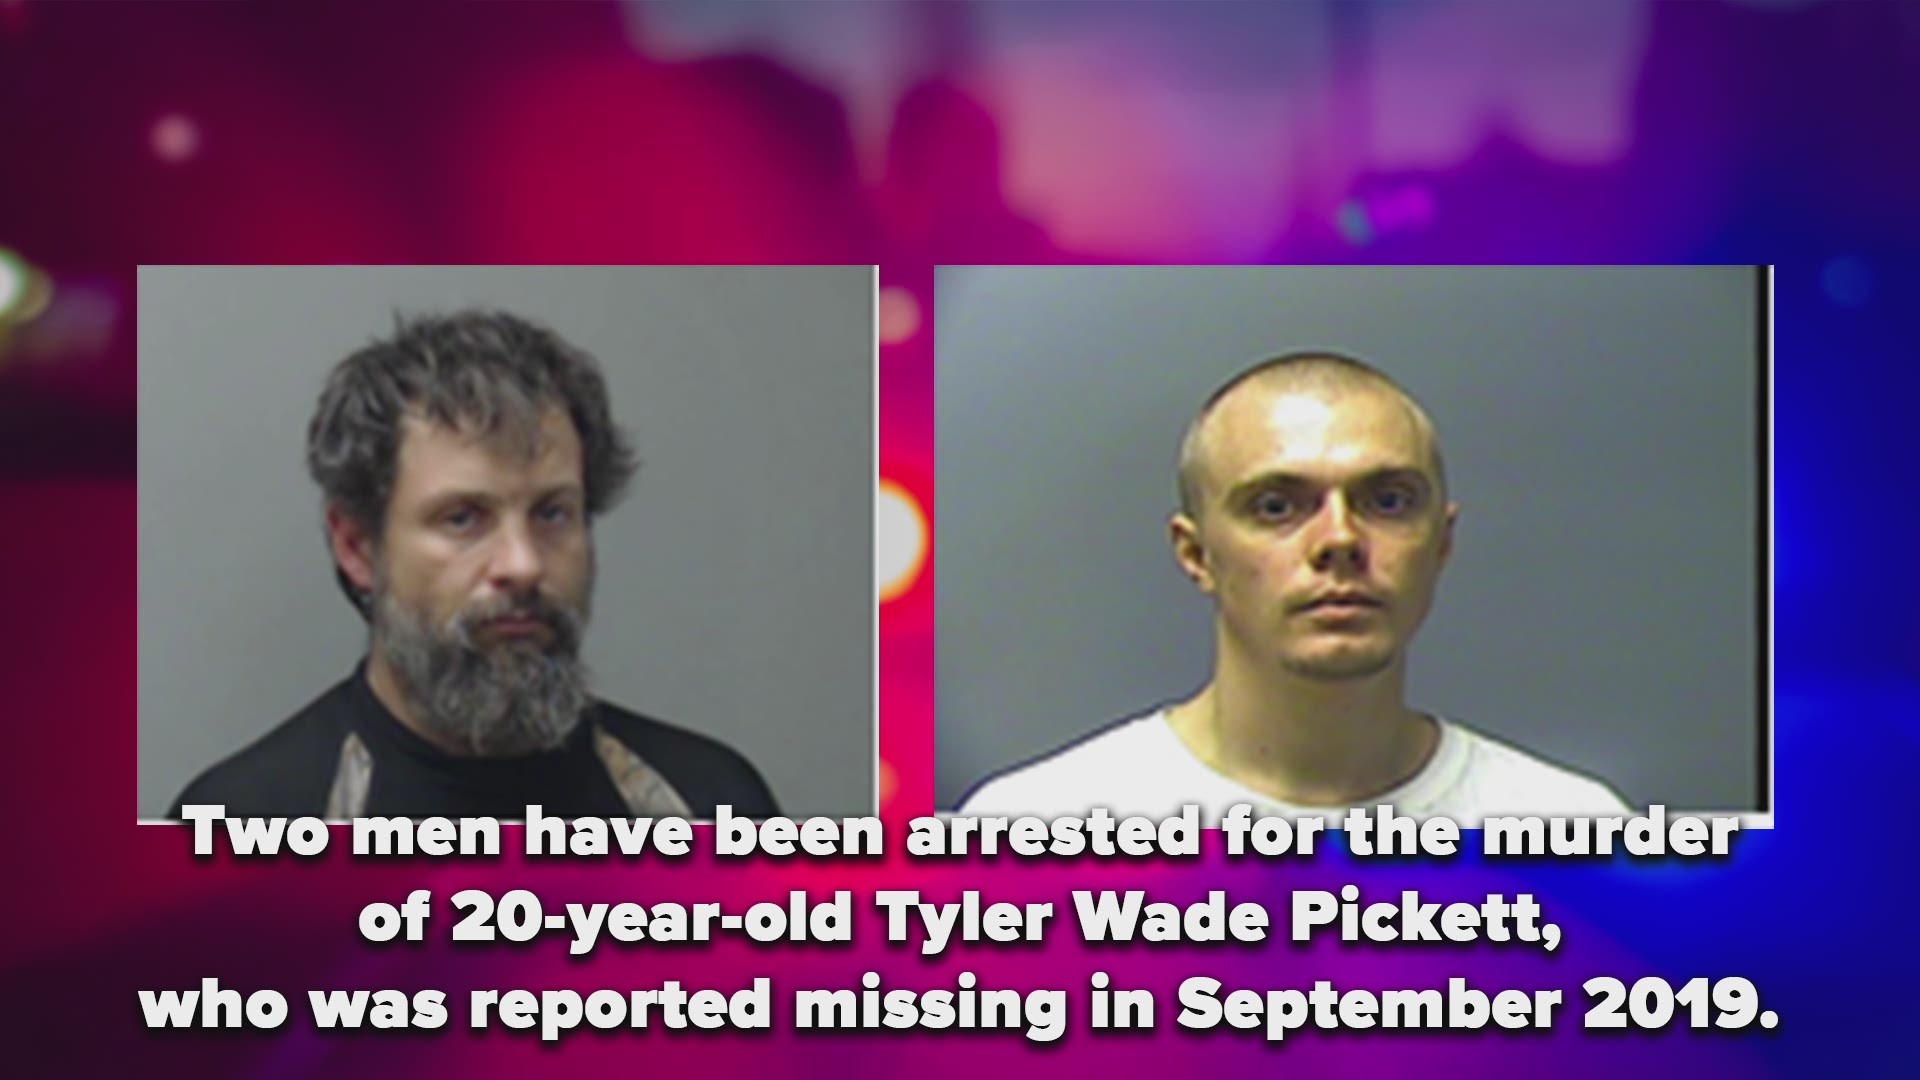 Two men have been arrested for the murder of 20-year-old Tyler Wade Pickett, who was reported missing in September 2019.